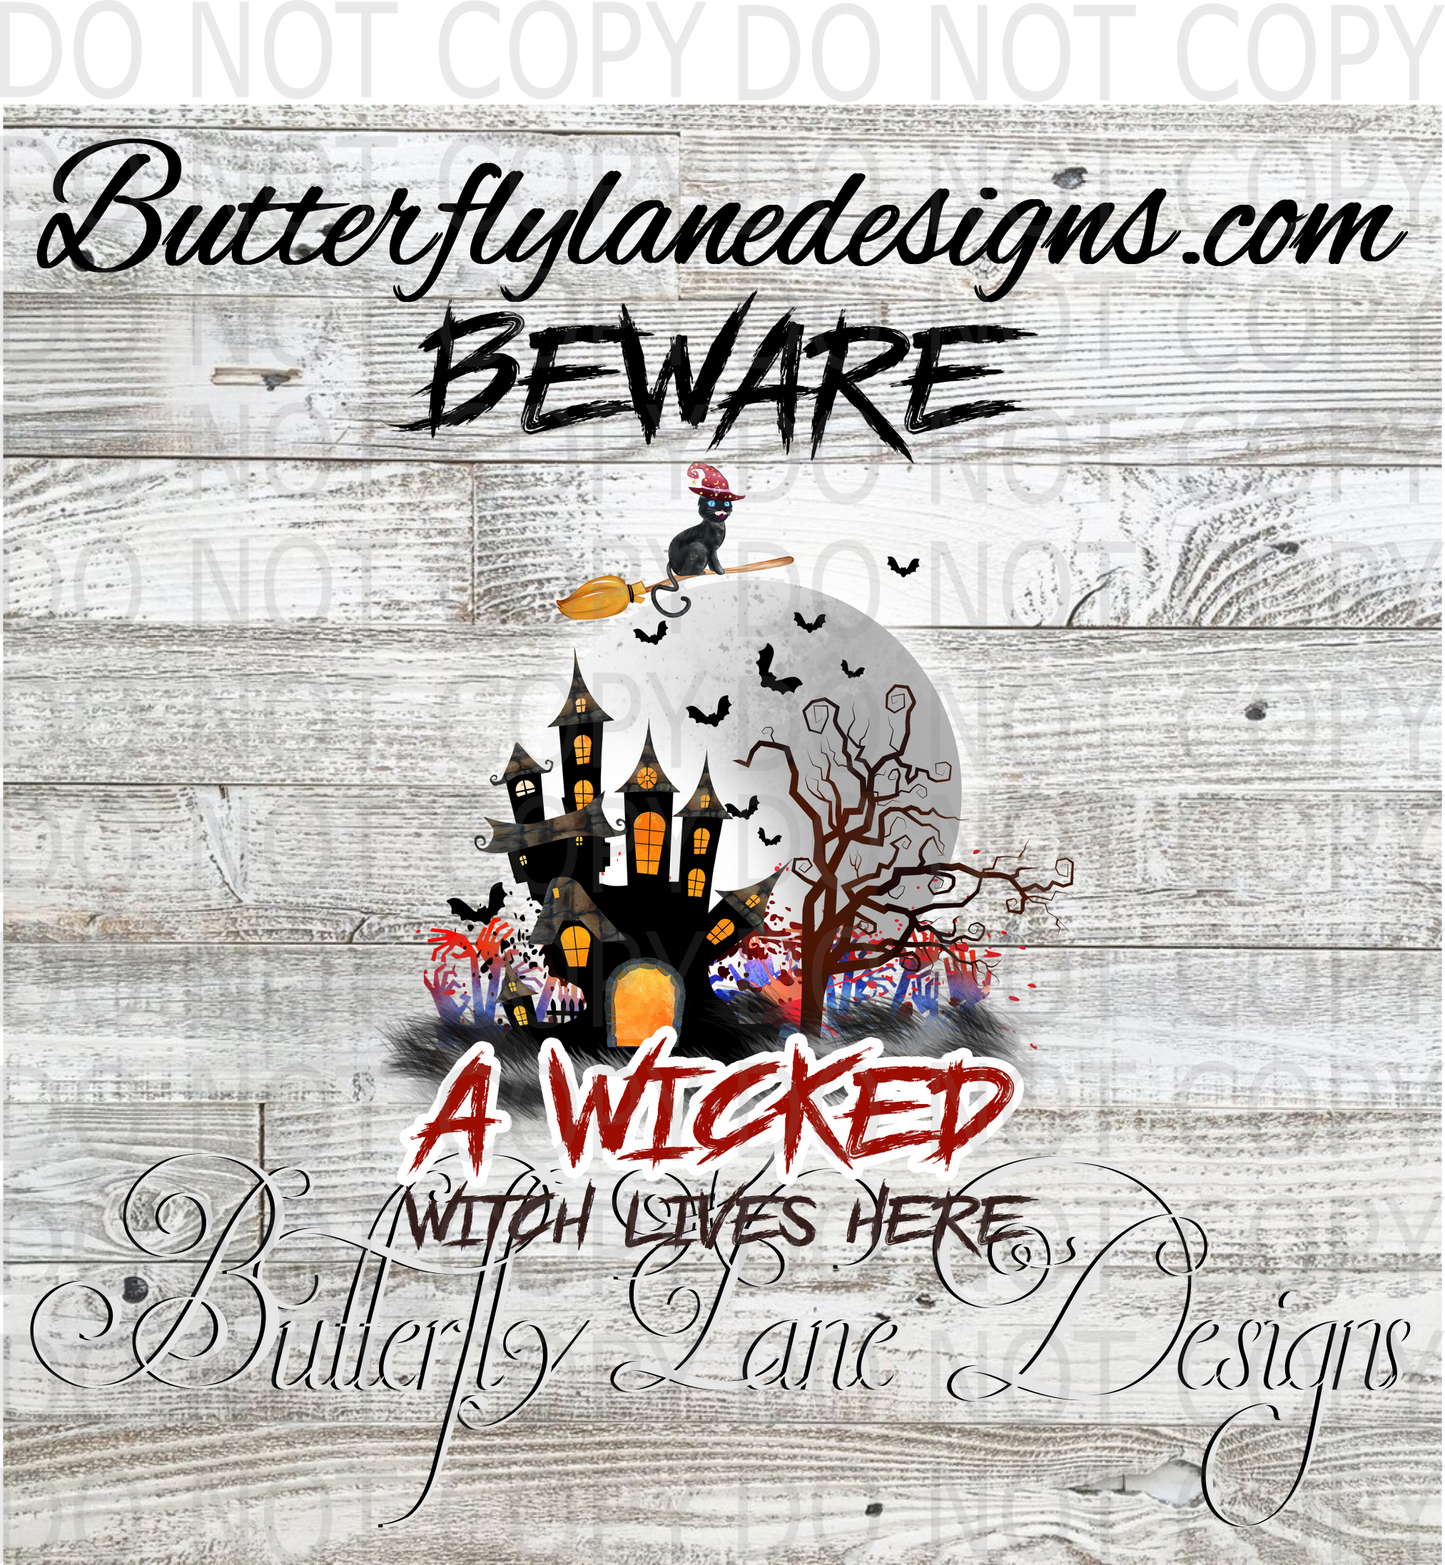 Beware a wicked witch lives here :: Clear Decal :: VC Decal